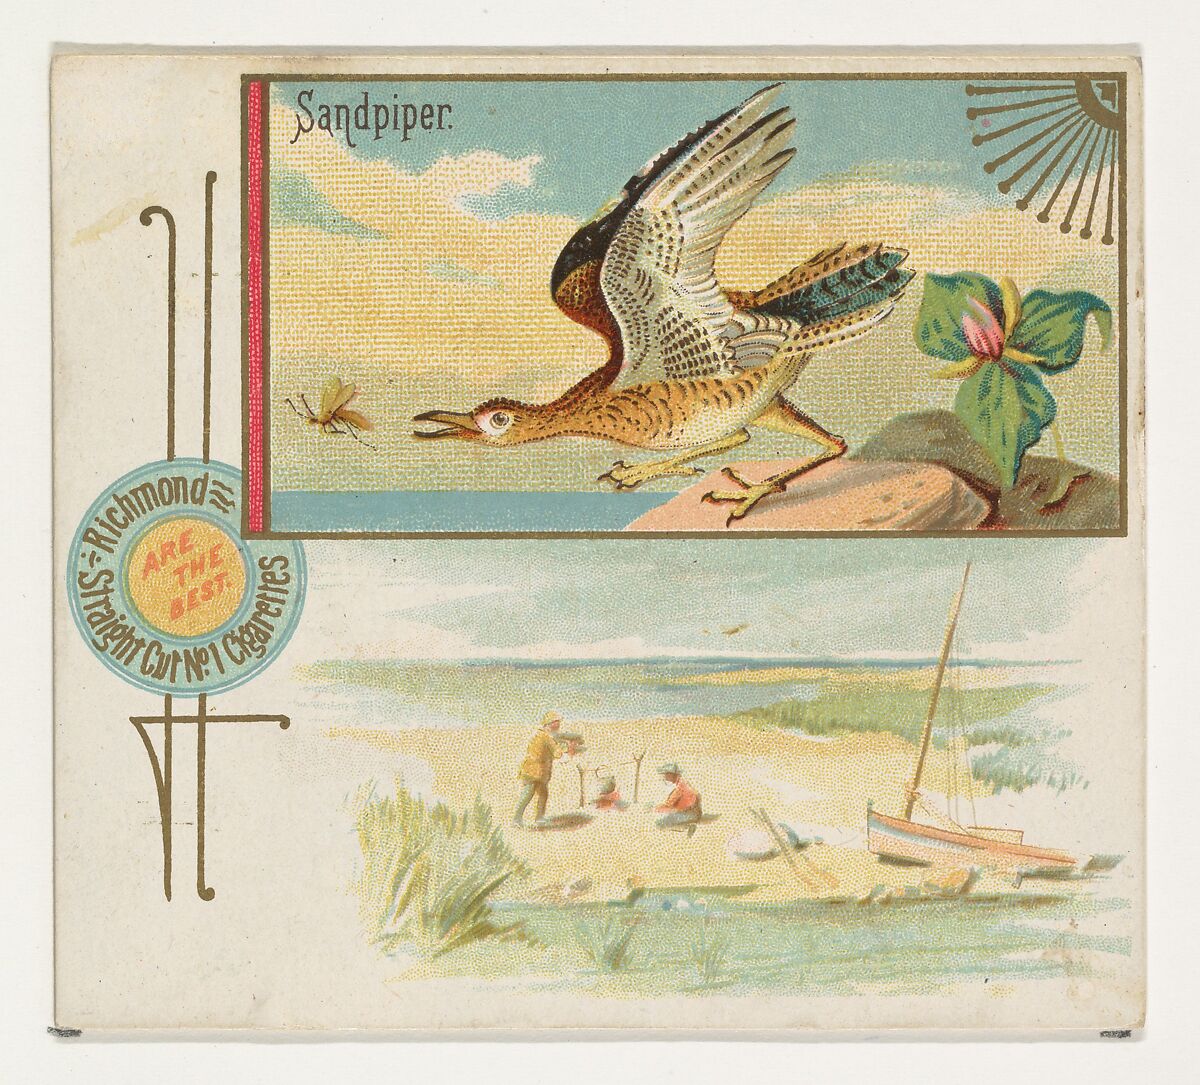 Sandpiper, from the Game Birds series (N40) for Allen & Ginter Cigarettes, Issued by Allen &amp; Ginter (American, Richmond, Virginia), Commercial color lithograph 